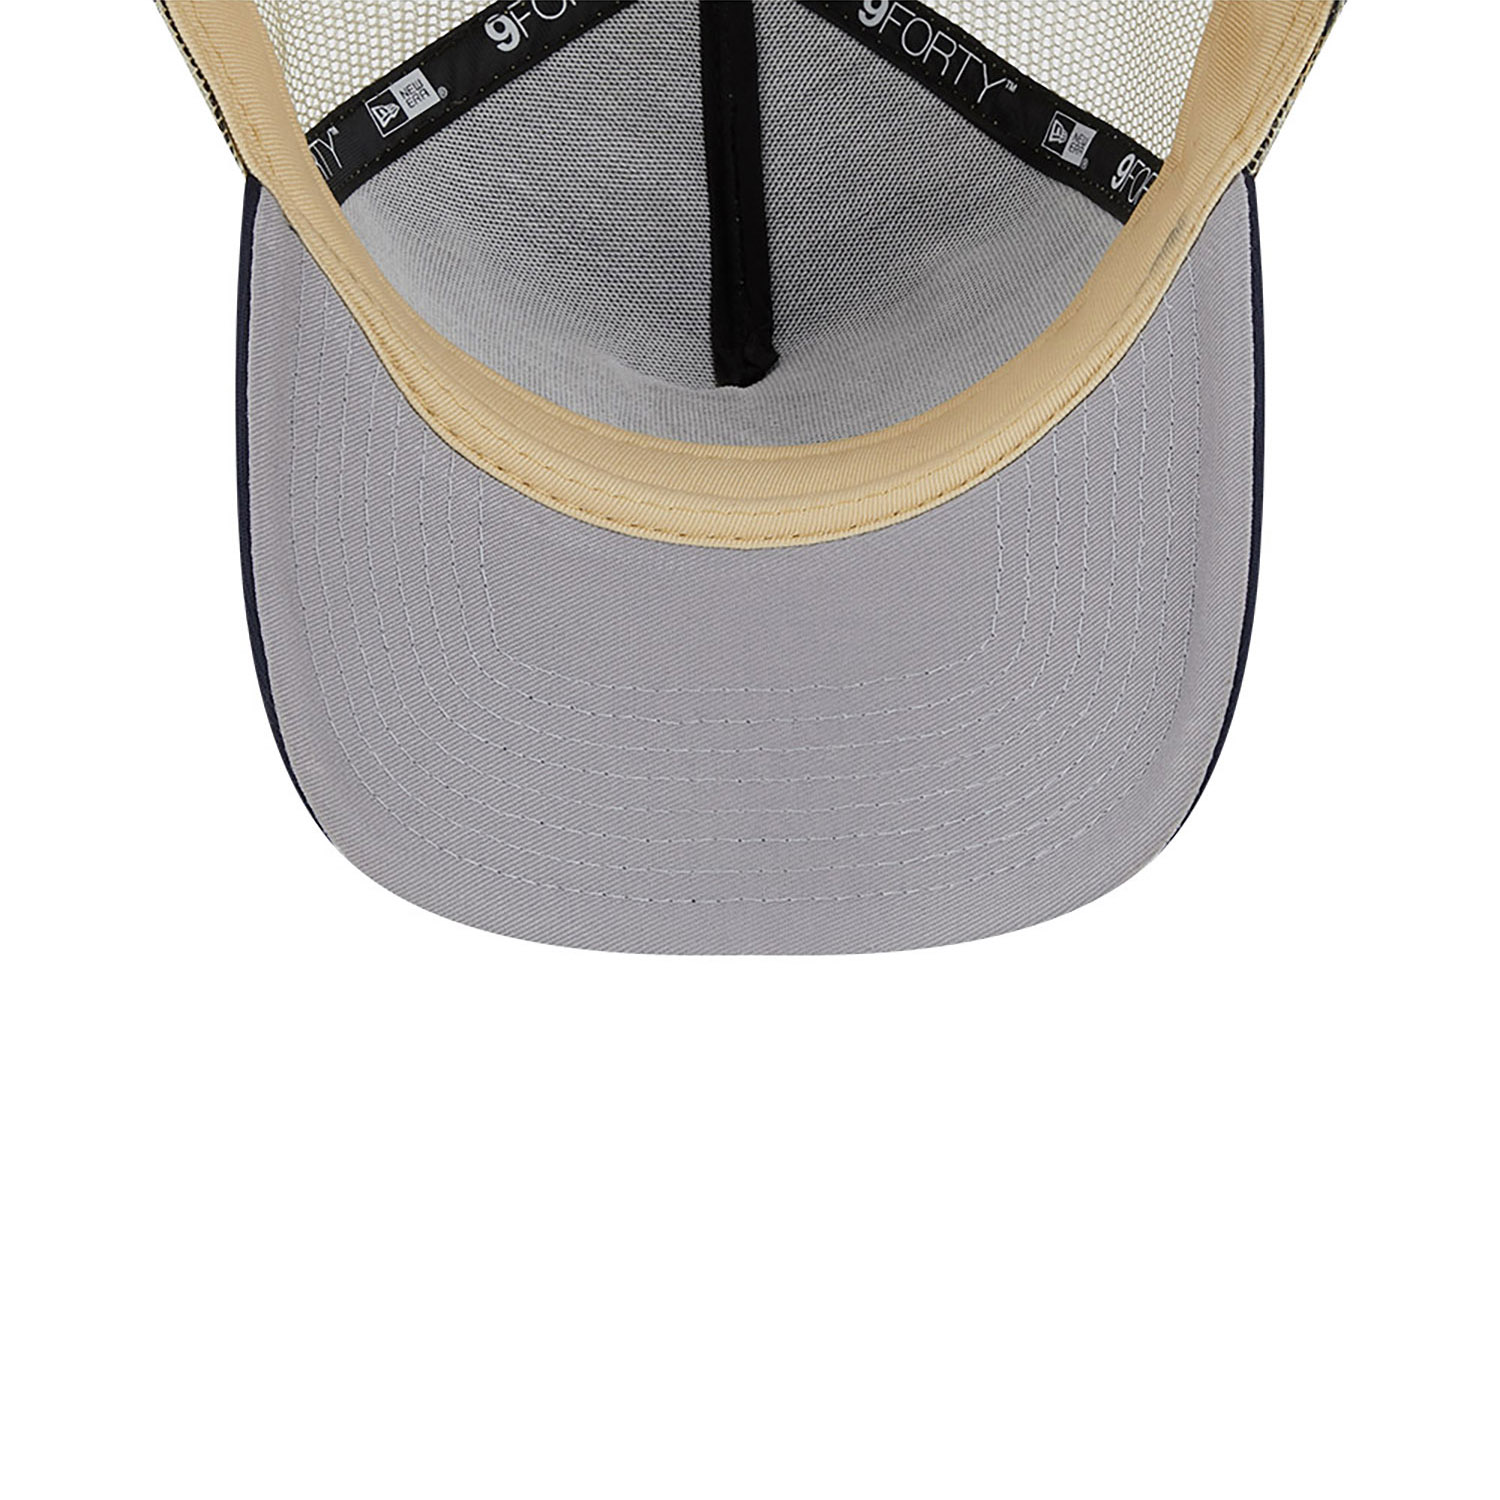 Beige Chicago White Sox All Day 9FORTY A-Frame Trucker Cap